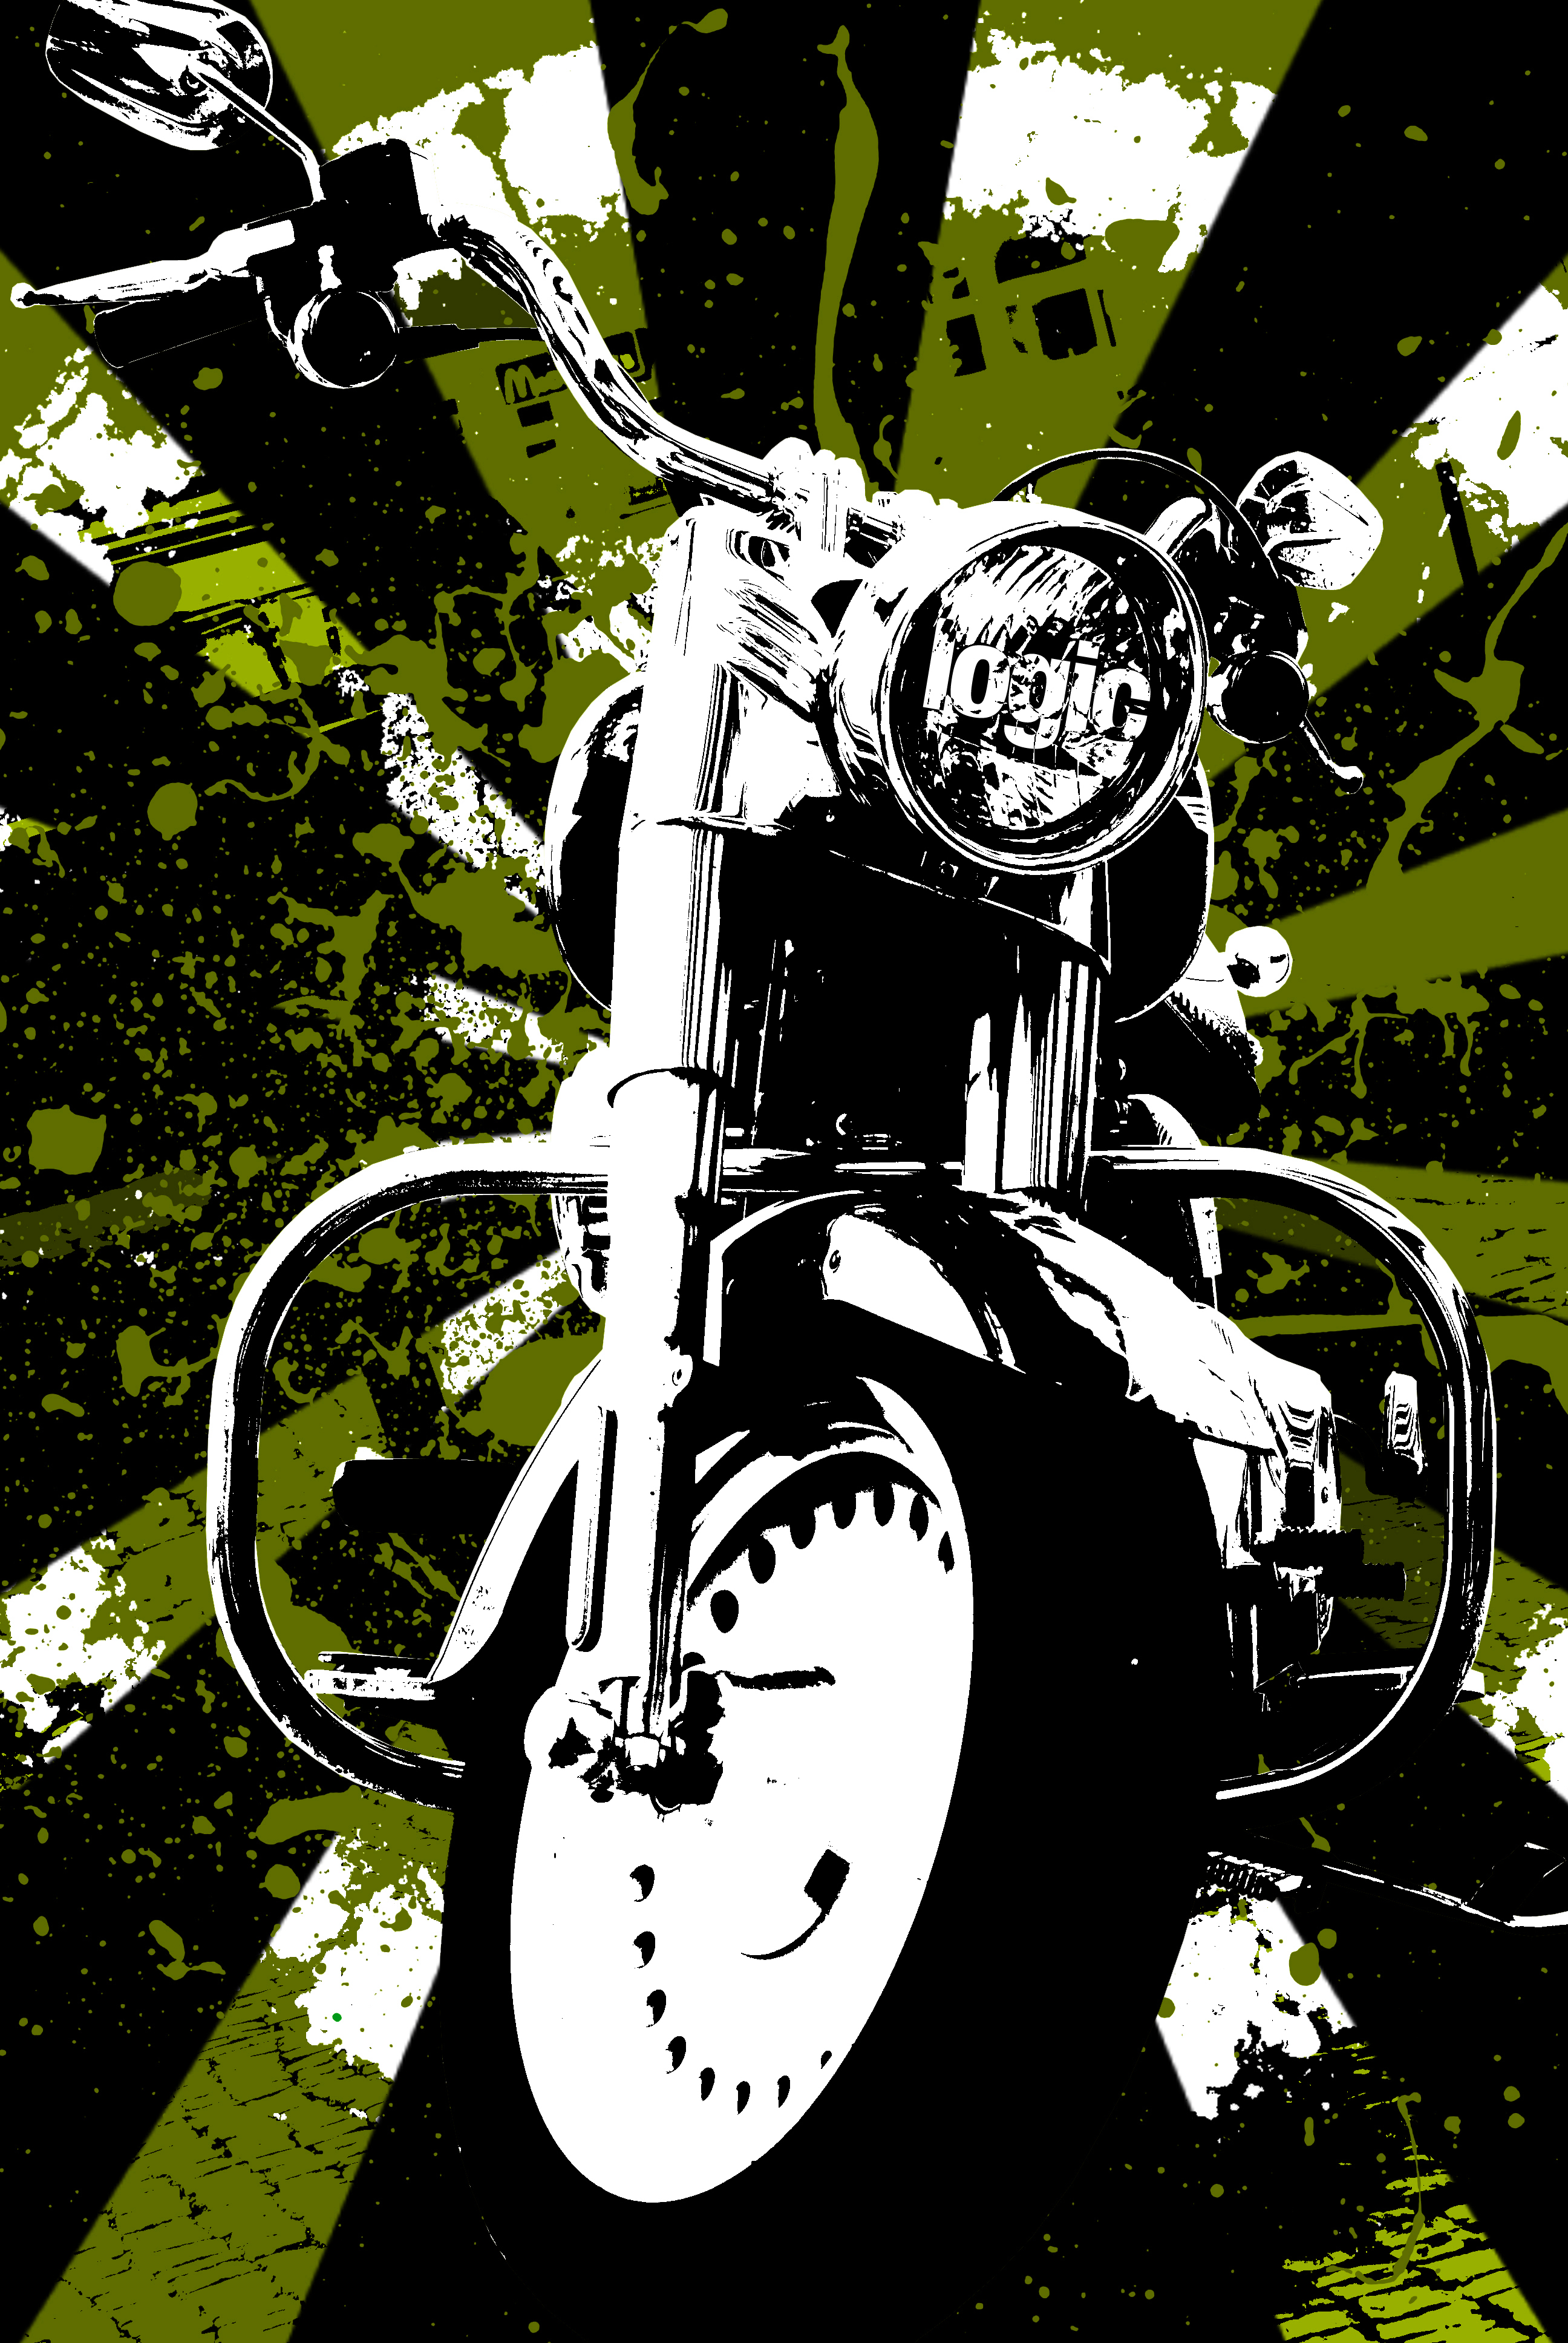 HARLEY DAVIDSON VECTOR LOGIC by auxa on Clipart library